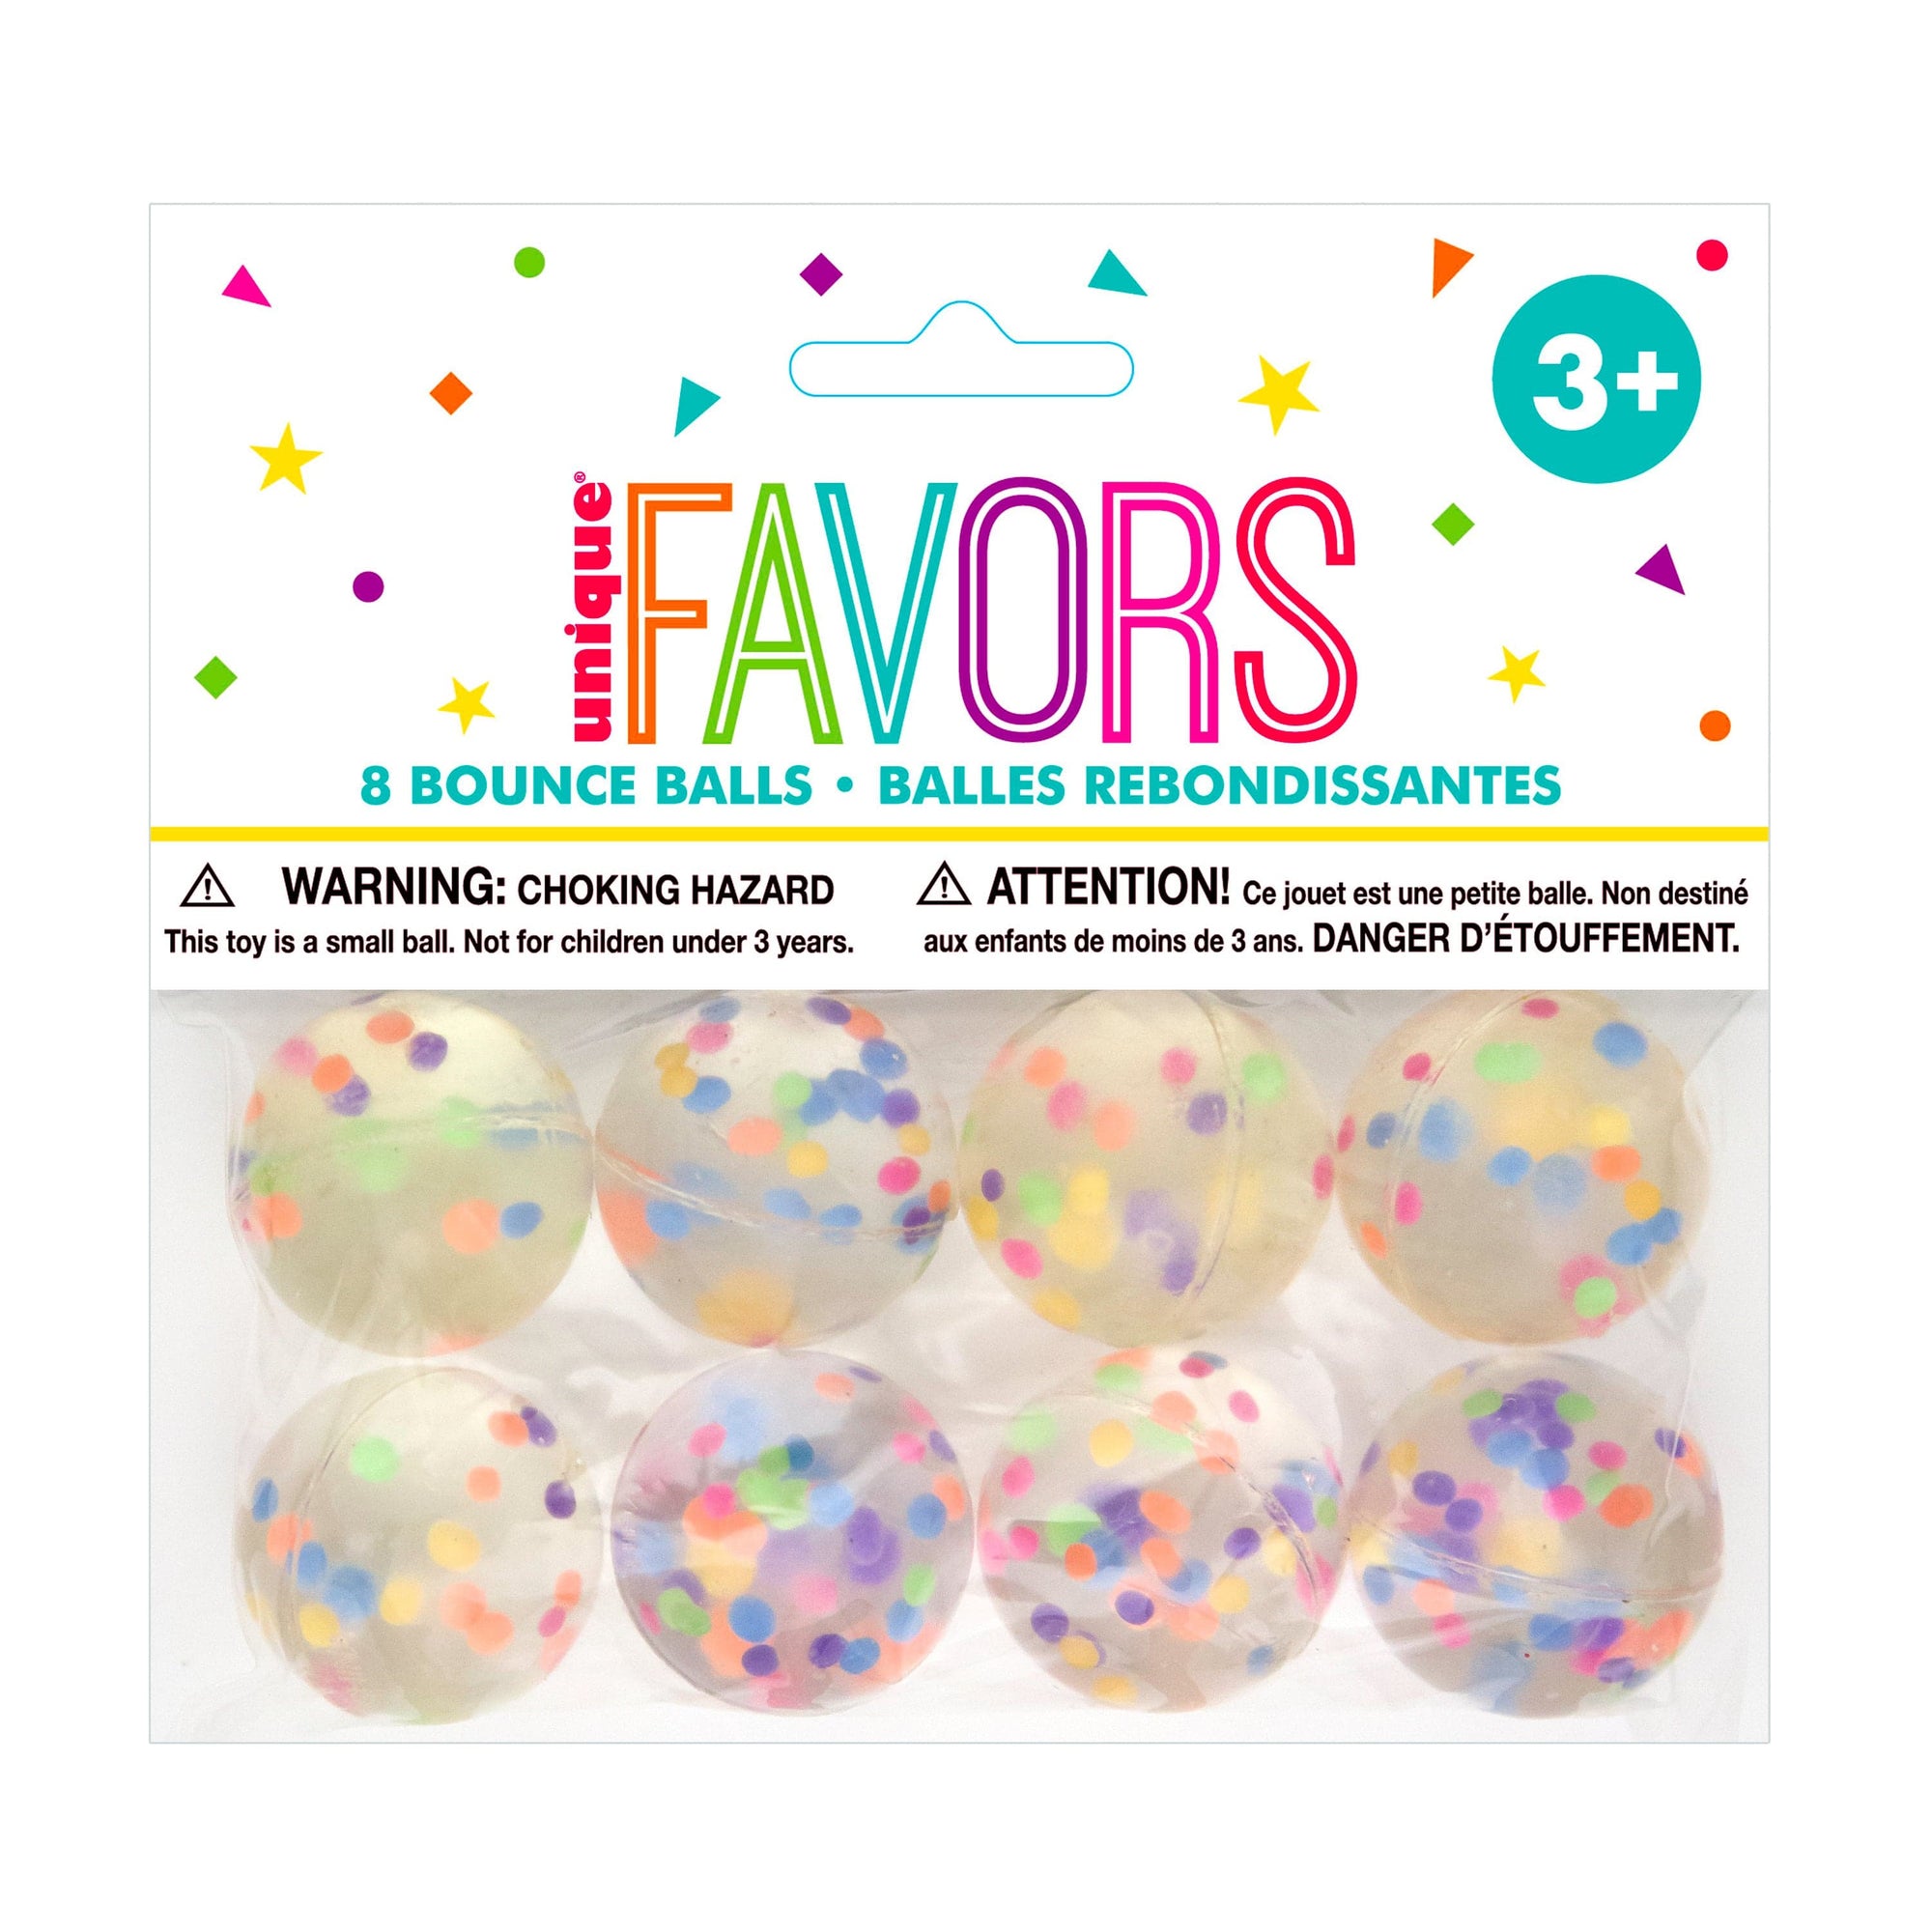 Unique Industries TOYS Confetti Filled Bouncy Ball Party Favors